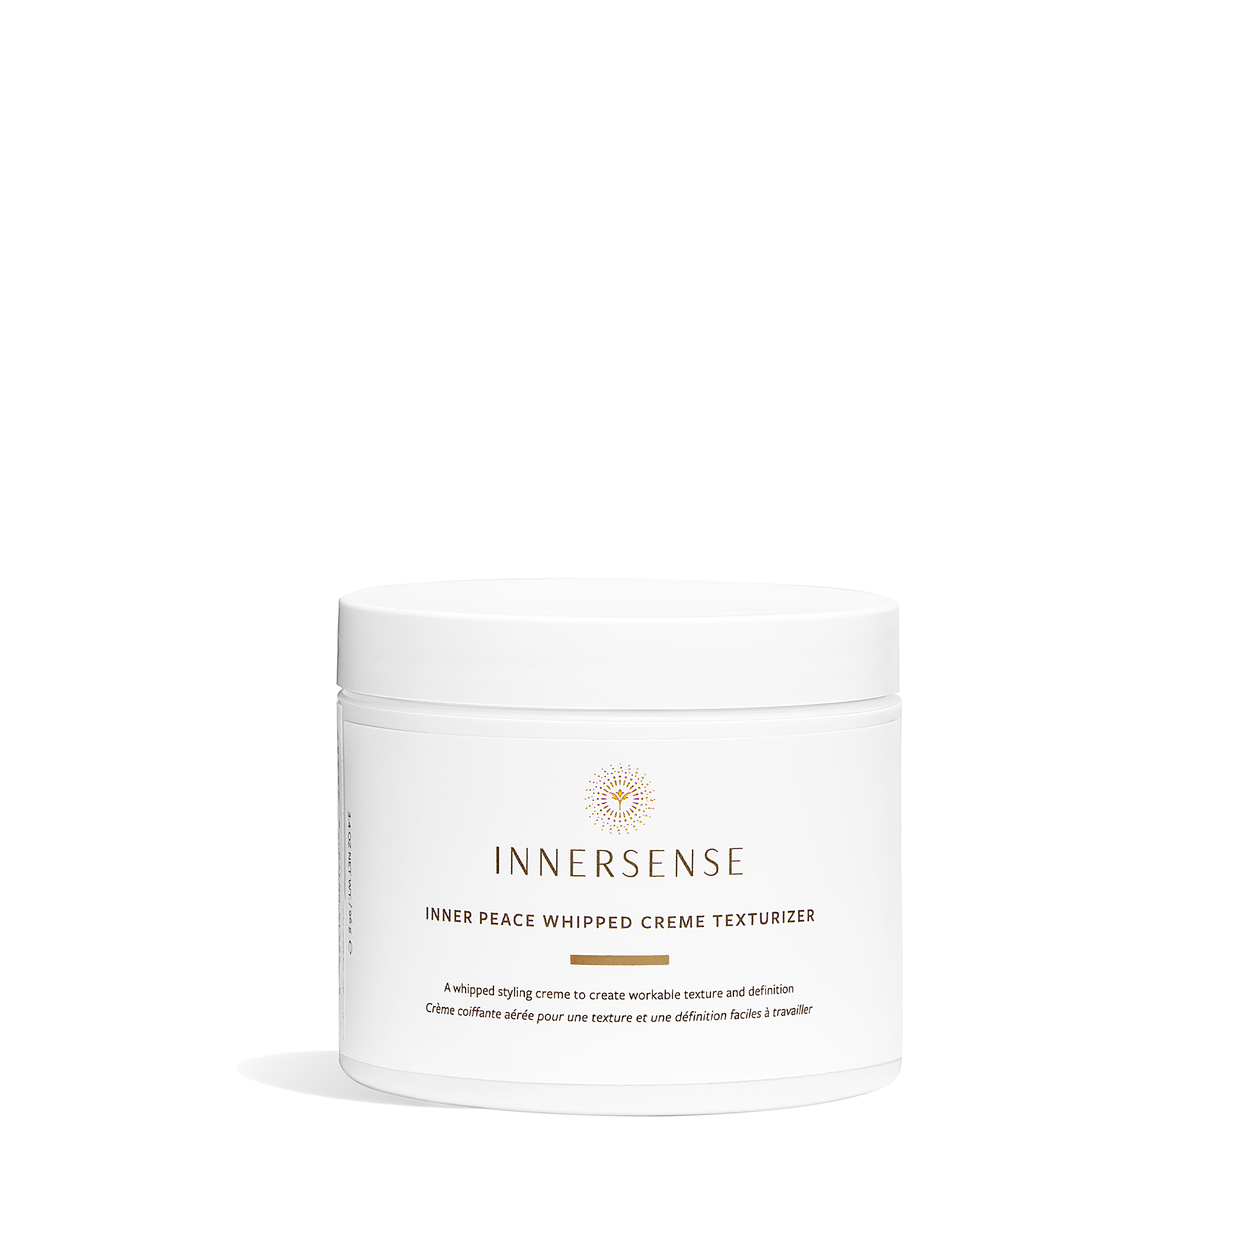 INNER PEACE WHIPPED CRÈME TEXTURIZER